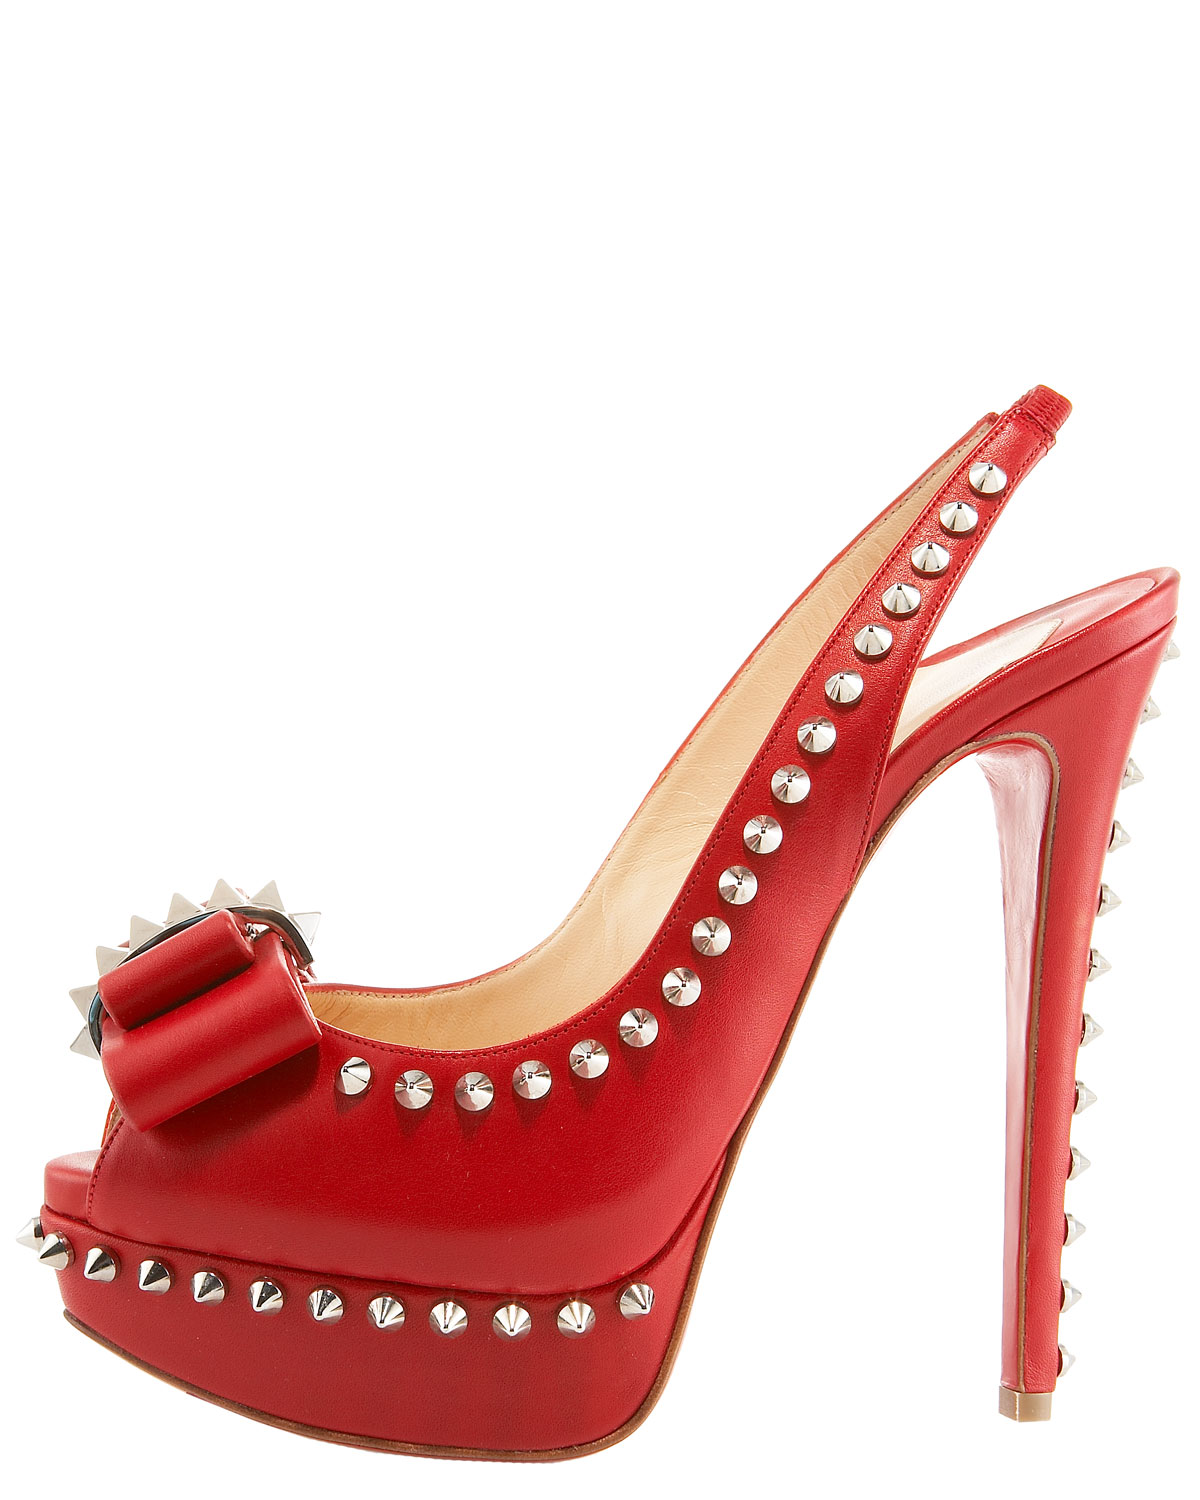 Christian louboutin Spiked Platform Slingback in Red | Lyst